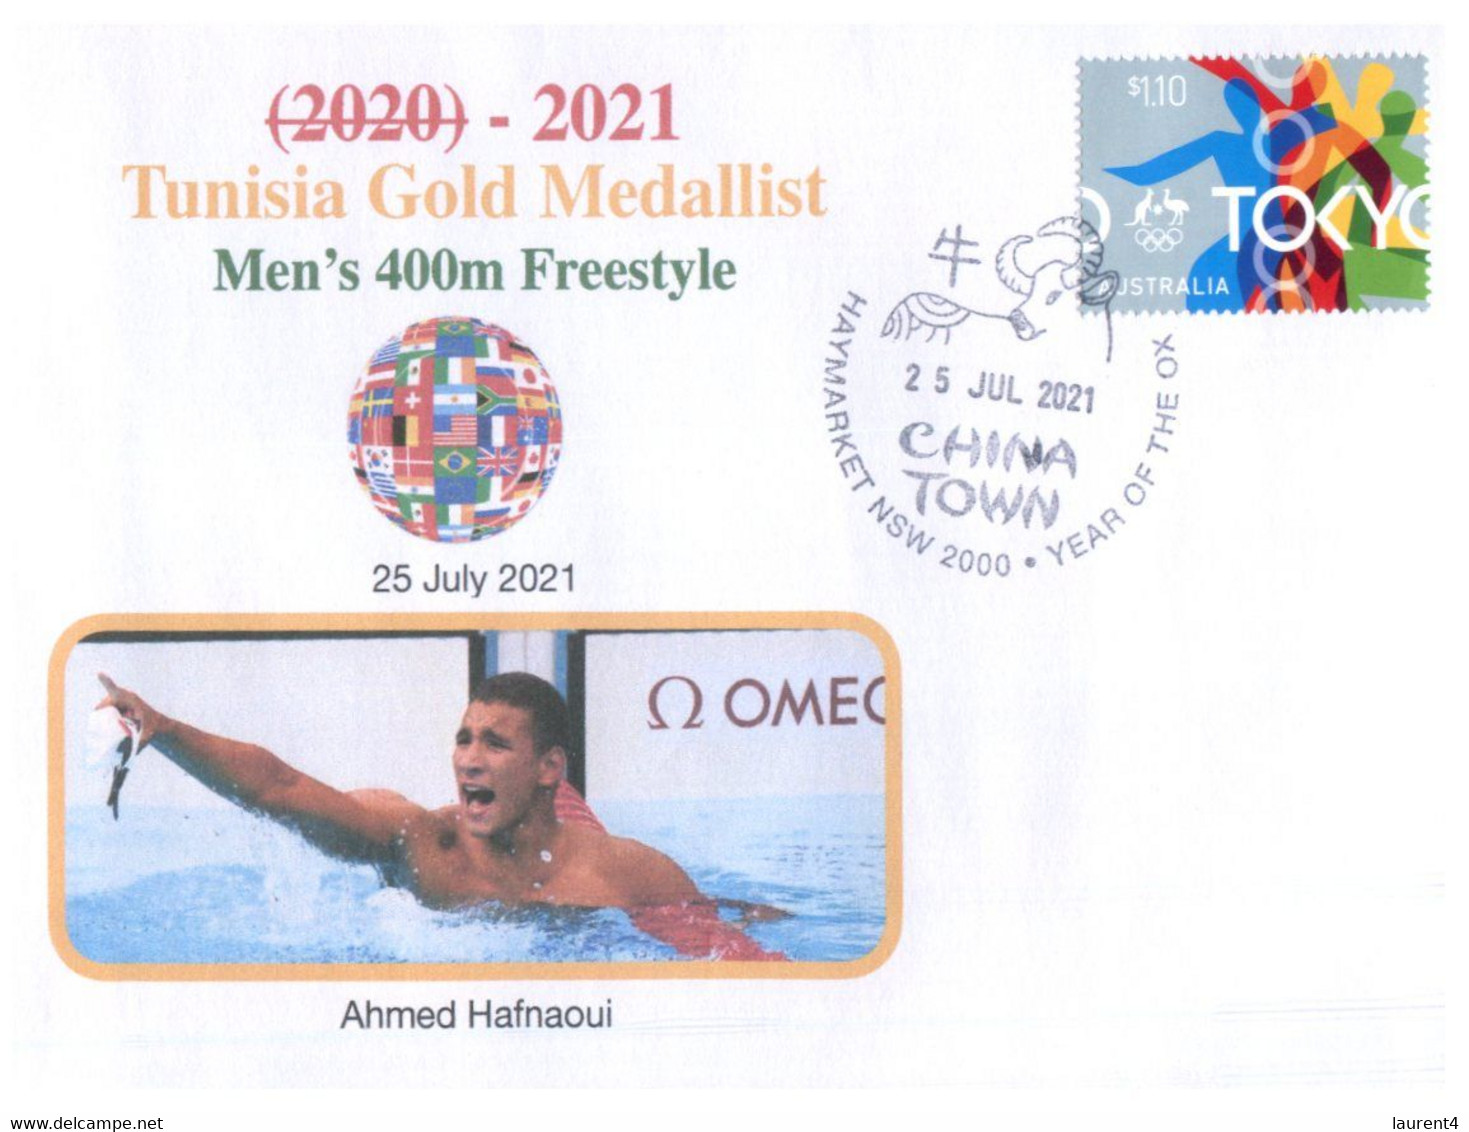 (WW 2) 2020 Tokyo Summer Olympic Games - Tunisia Gold Medal - 25-7-2021 - Men's Swimming - Eté 2020 : Tokyo